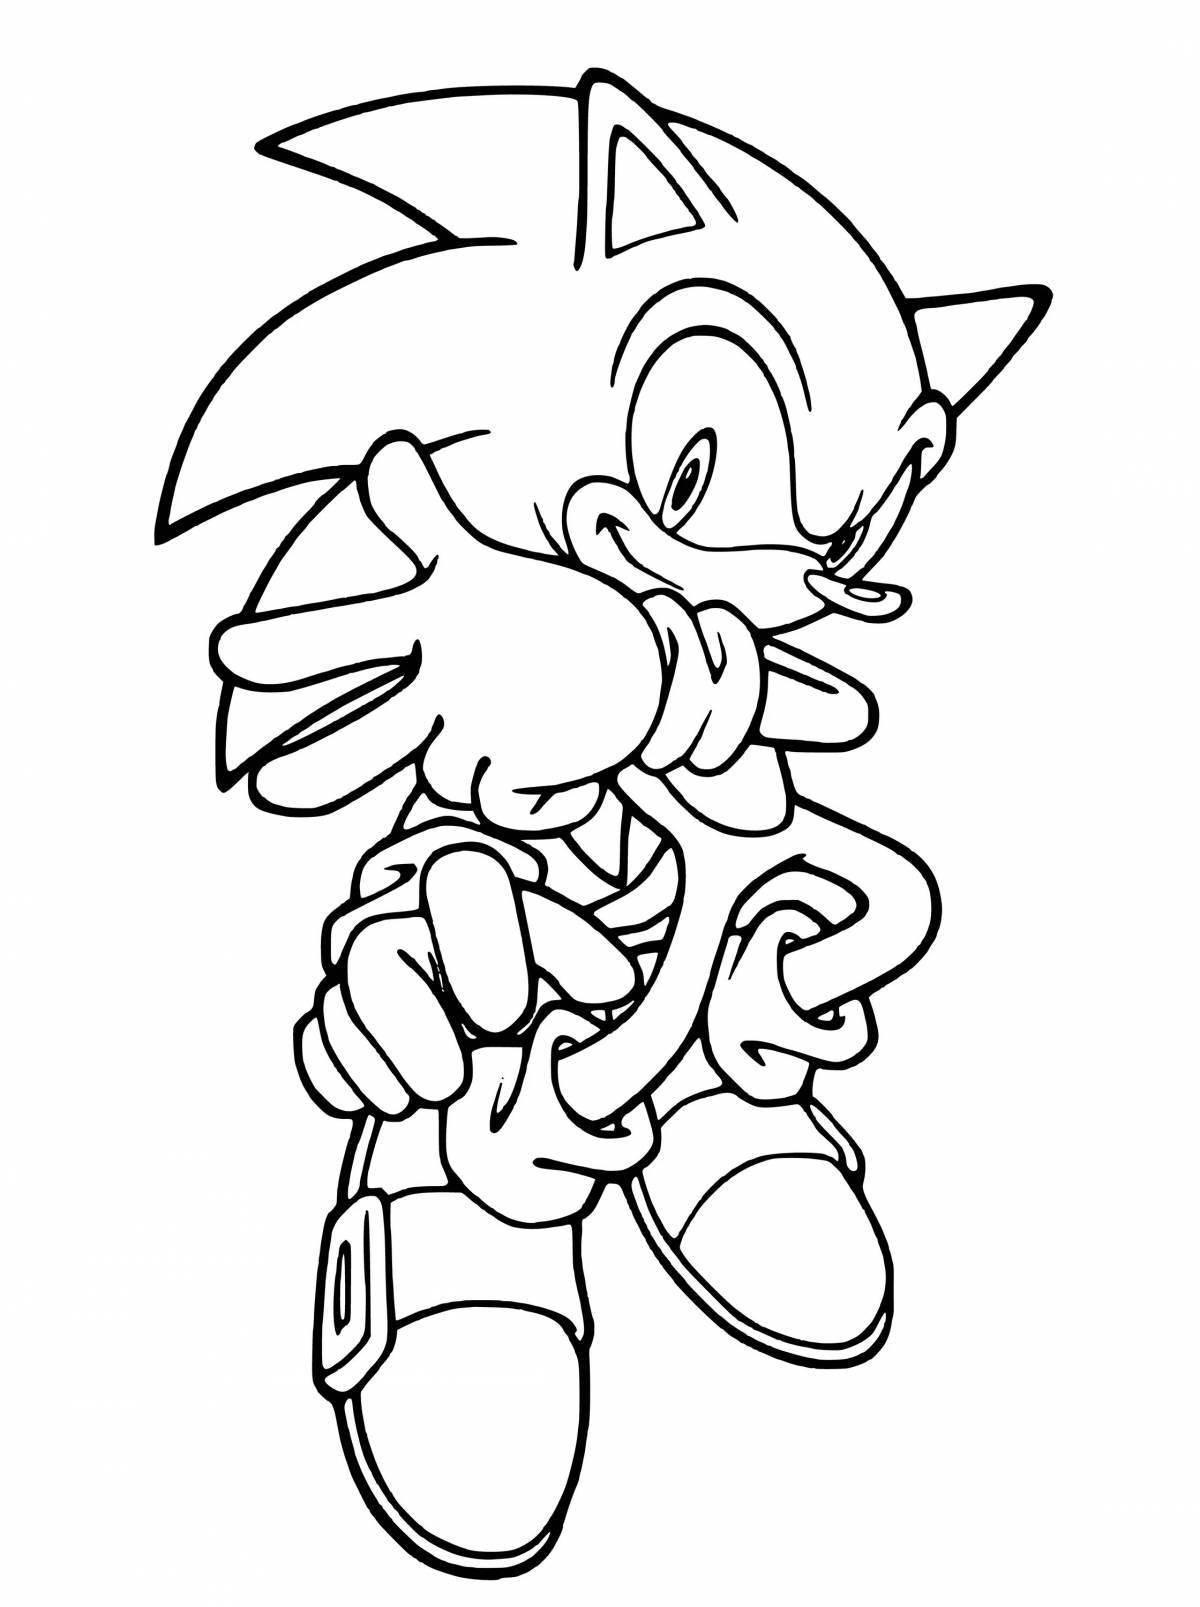 Colorful minecraft sonic coloring page